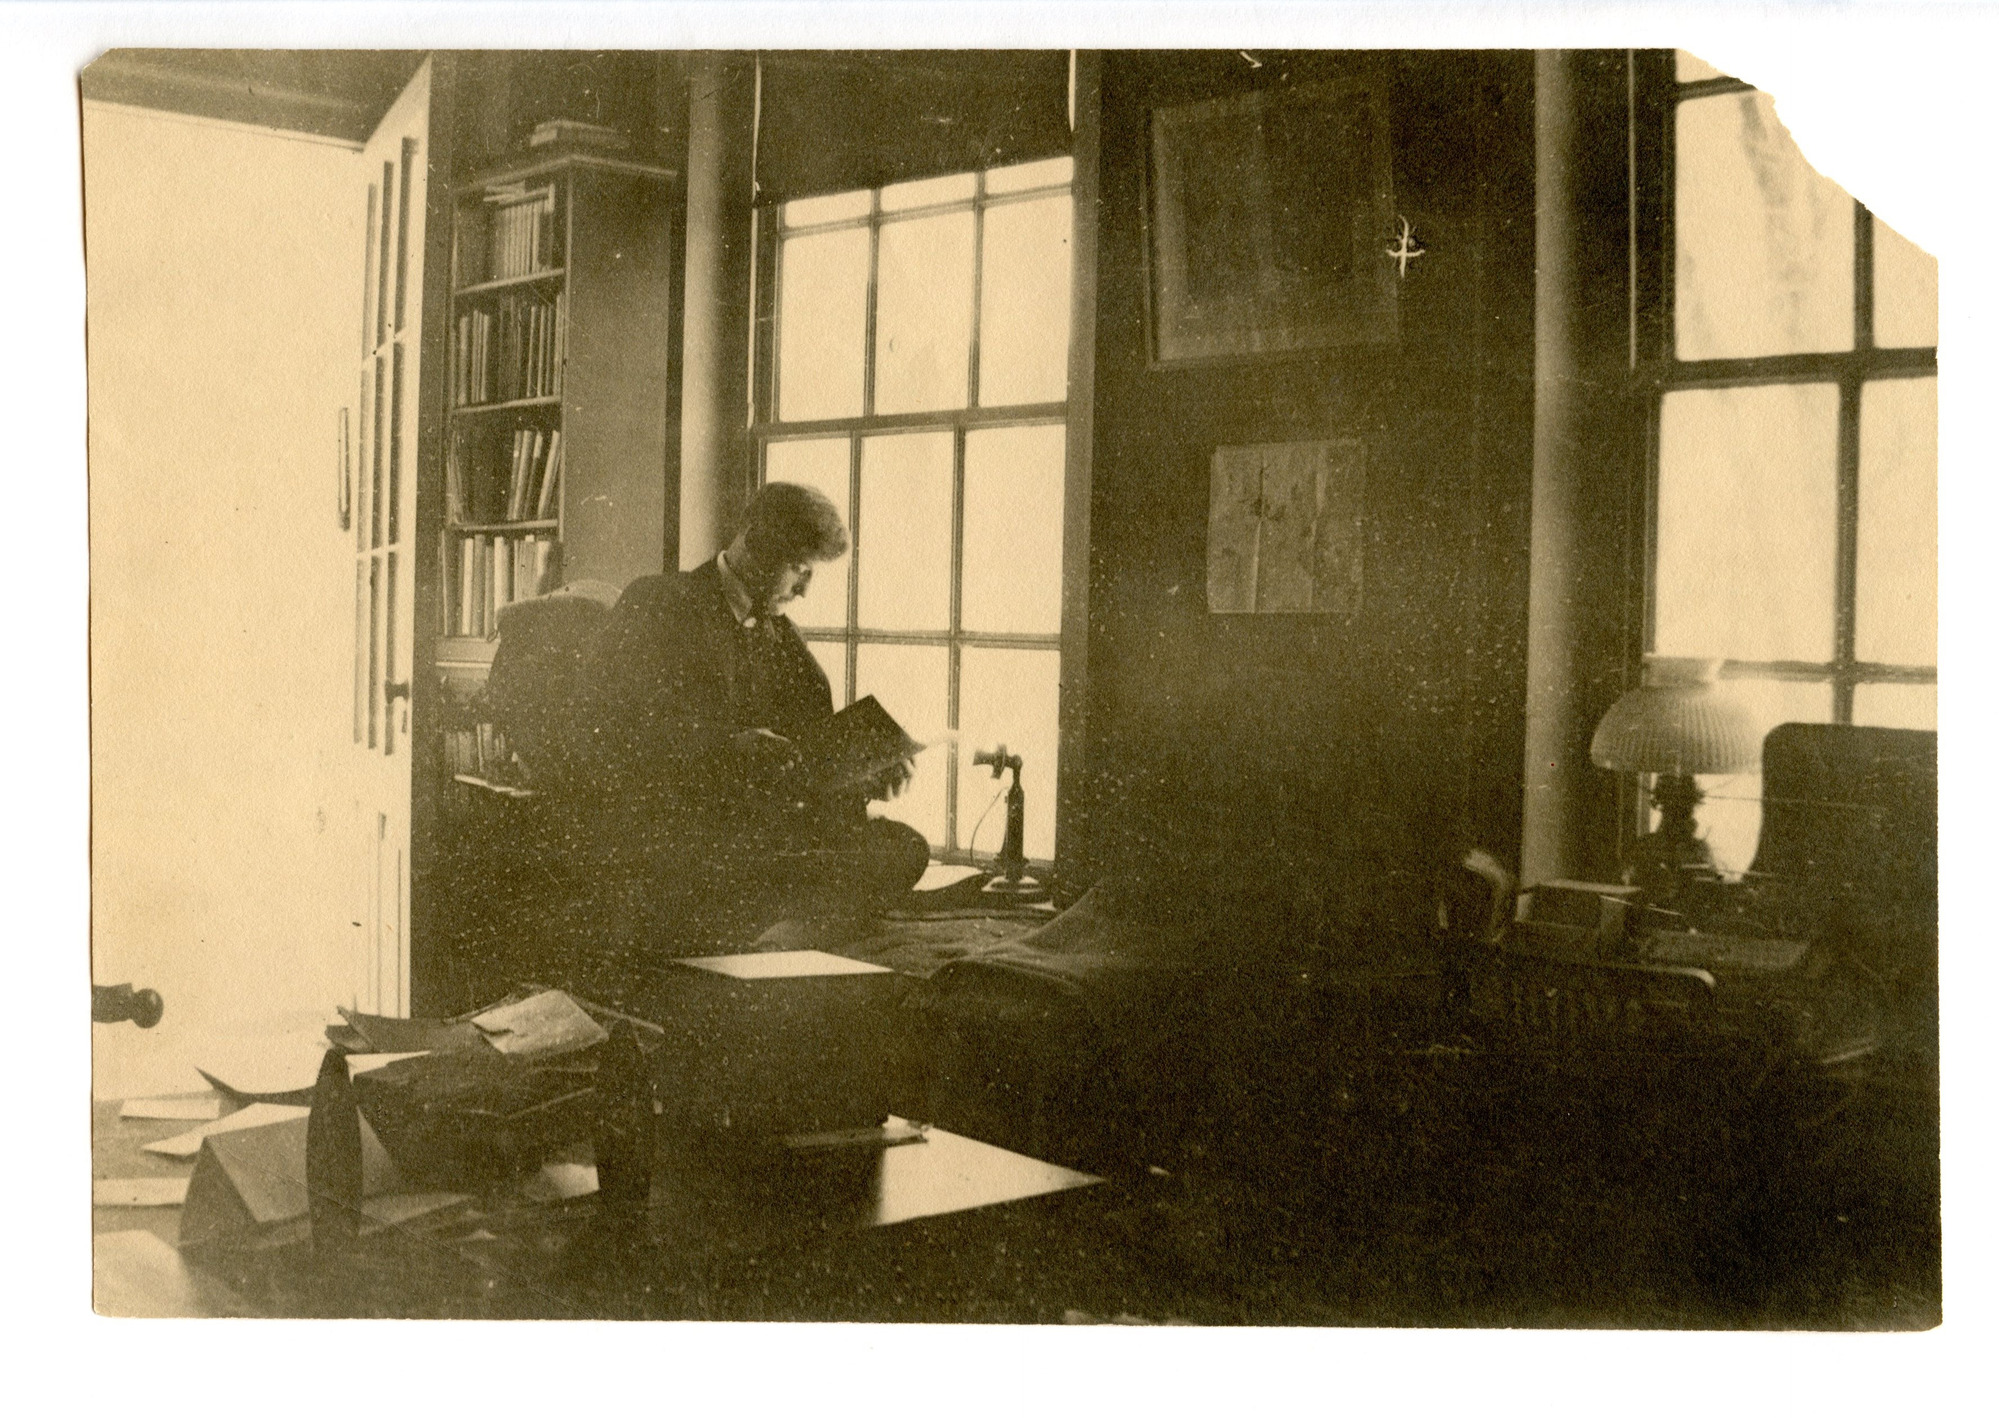 Young man sitting in front of window reading.